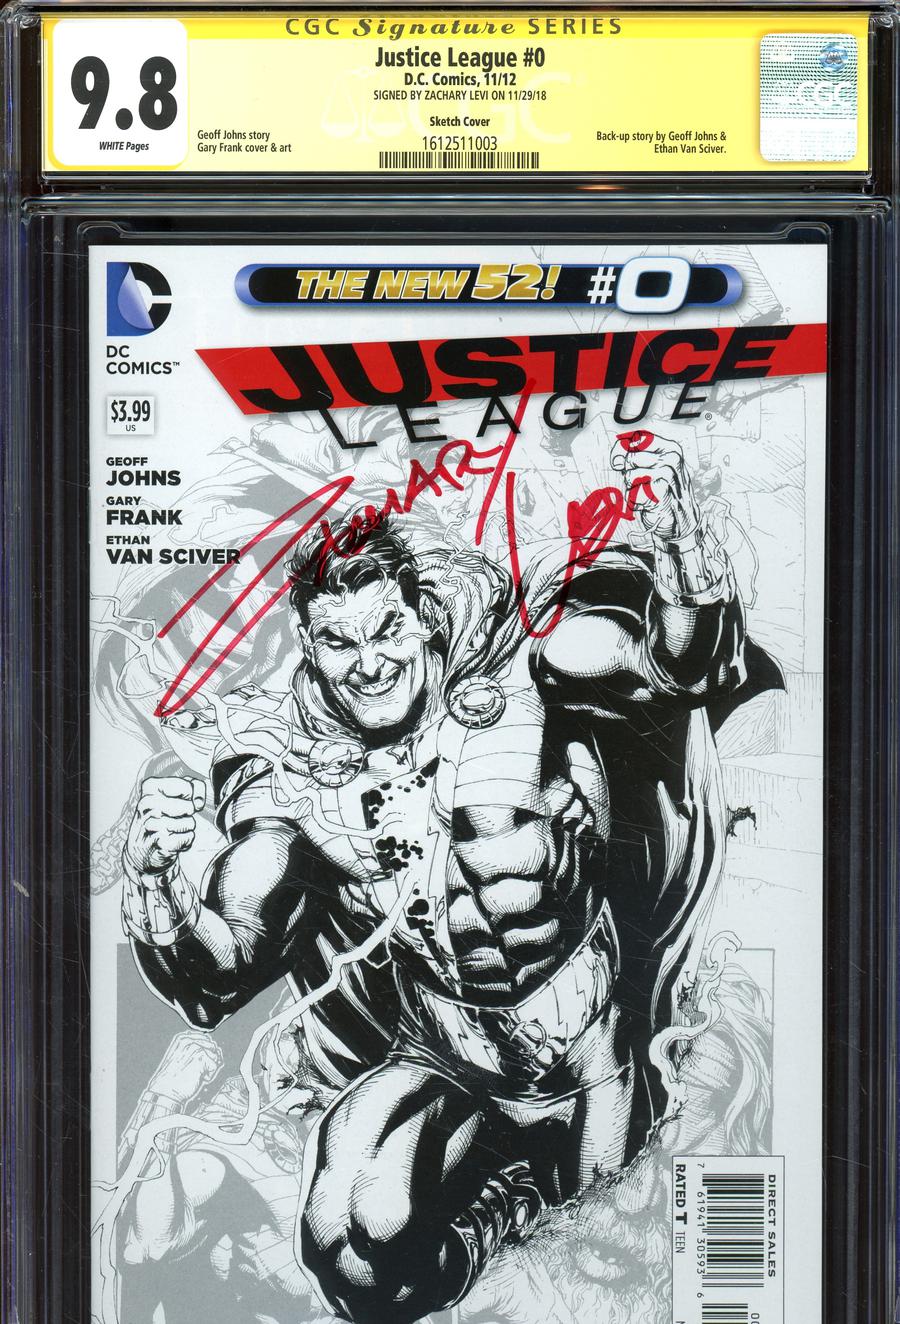 Justice League Vol 2 #0 Cover F Incentive Gary Frank Sketch Cover Signed By Zachary Levi CGC 9.8